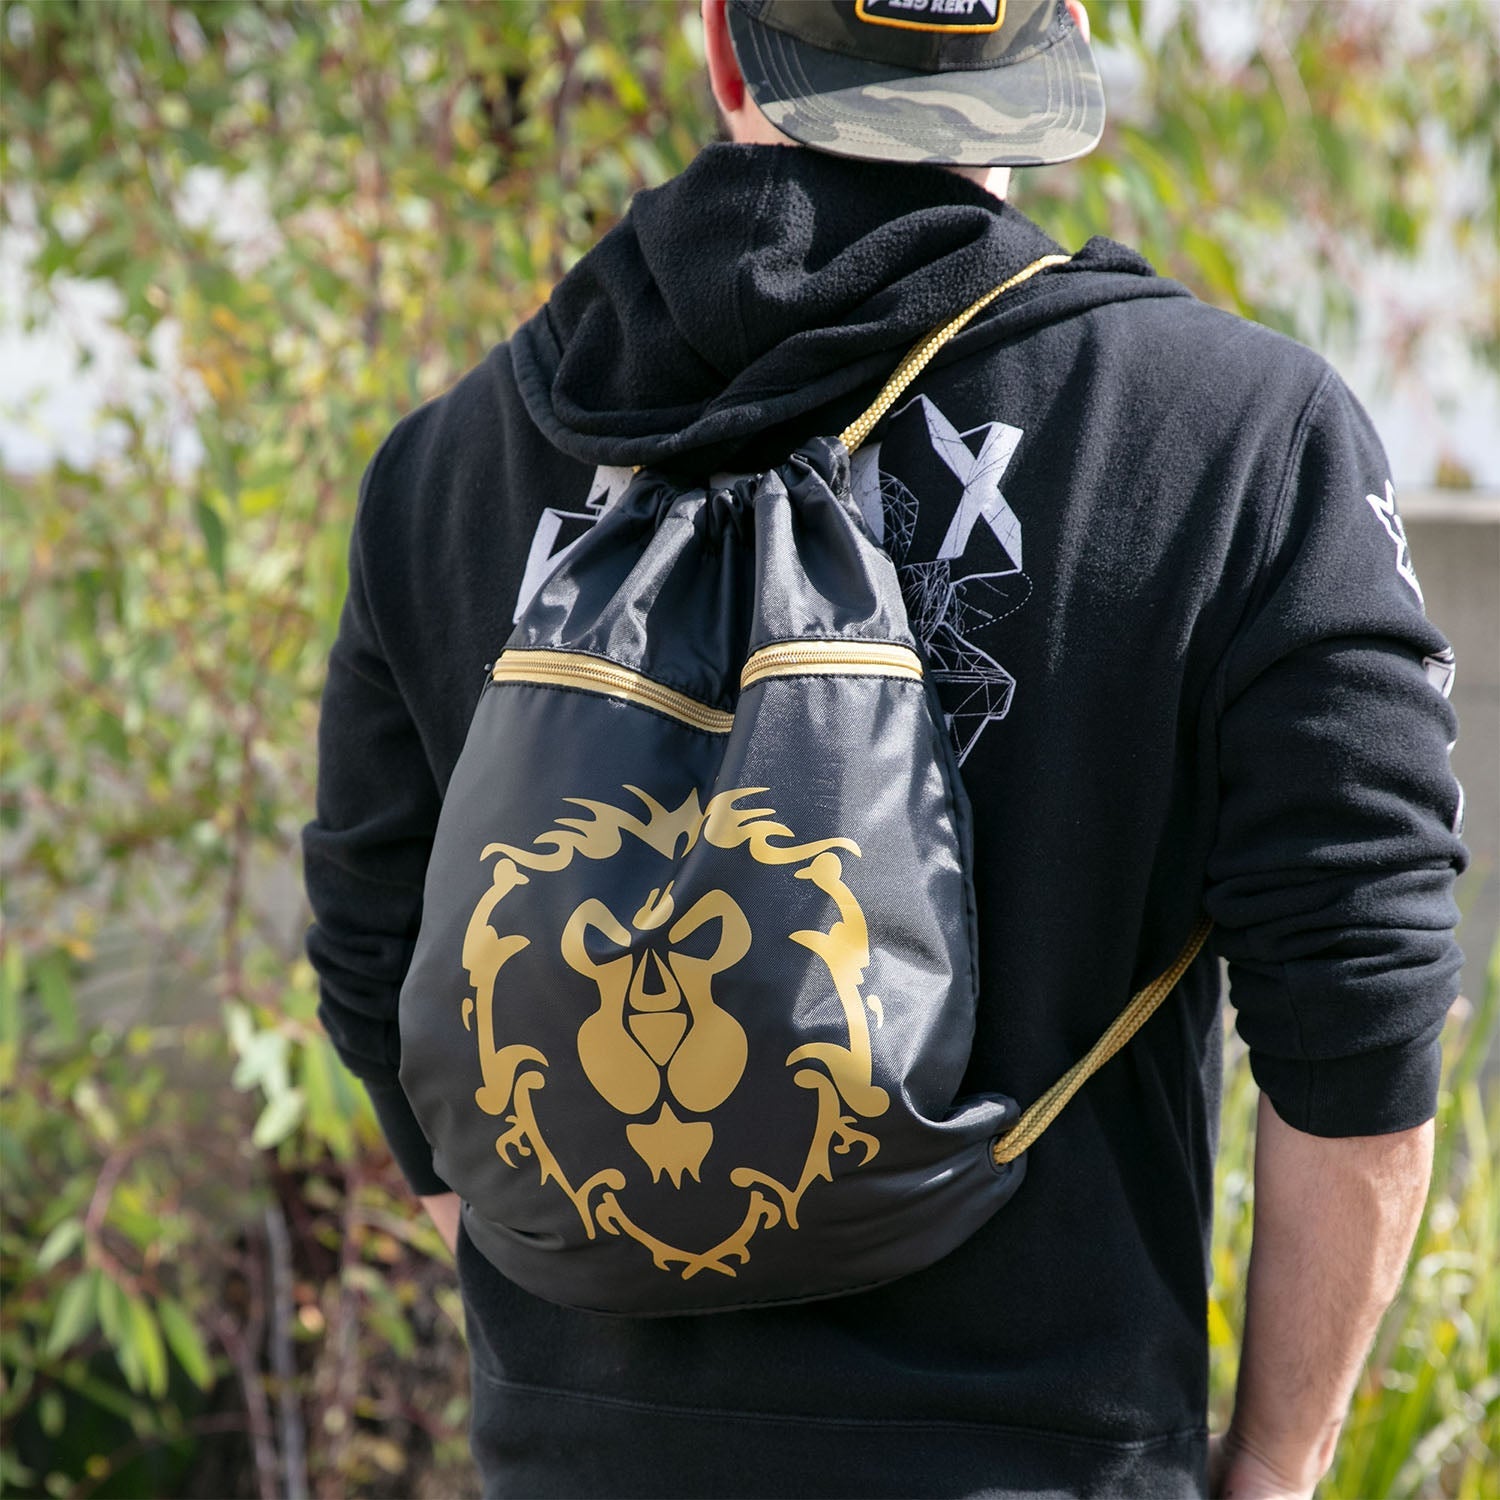 World of Warcraft J!NX Alliance Loot Bag in Black - Back View